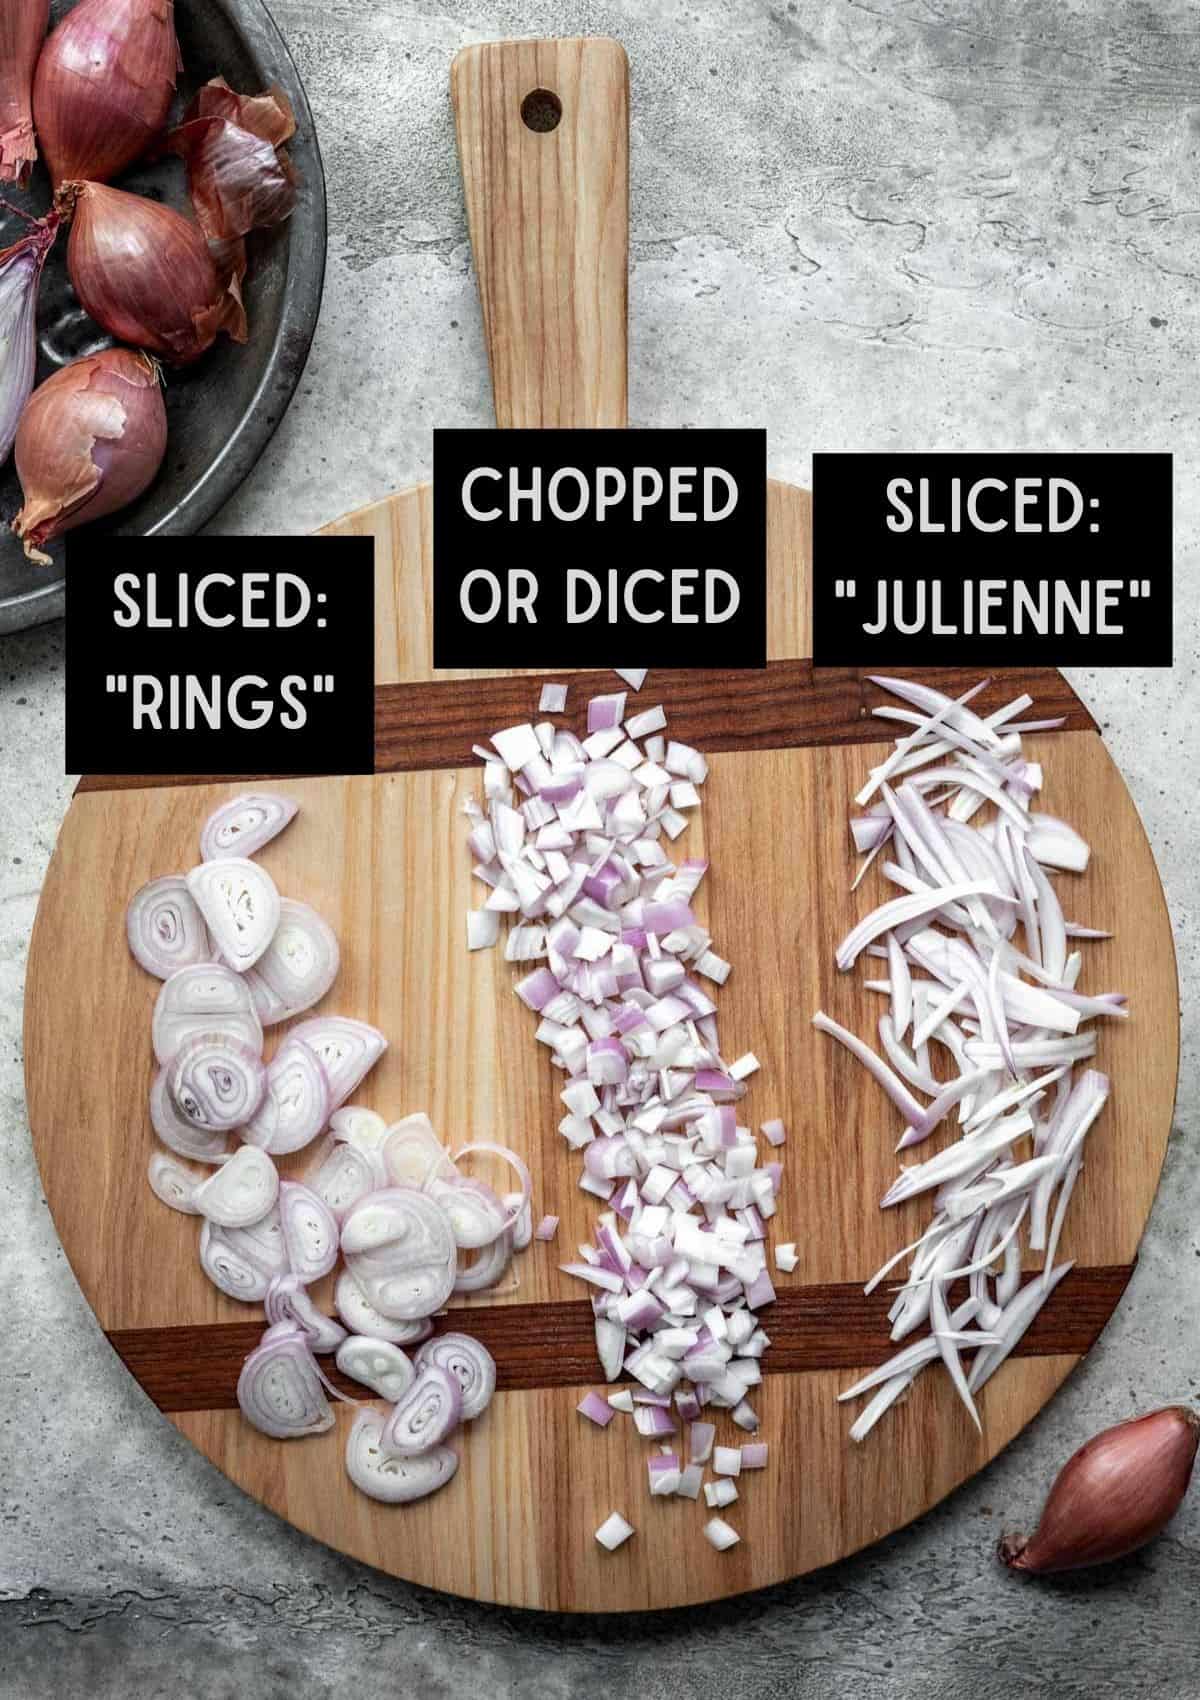 3 different ways to cut shallots: rings, chopped or diced, and julienne.